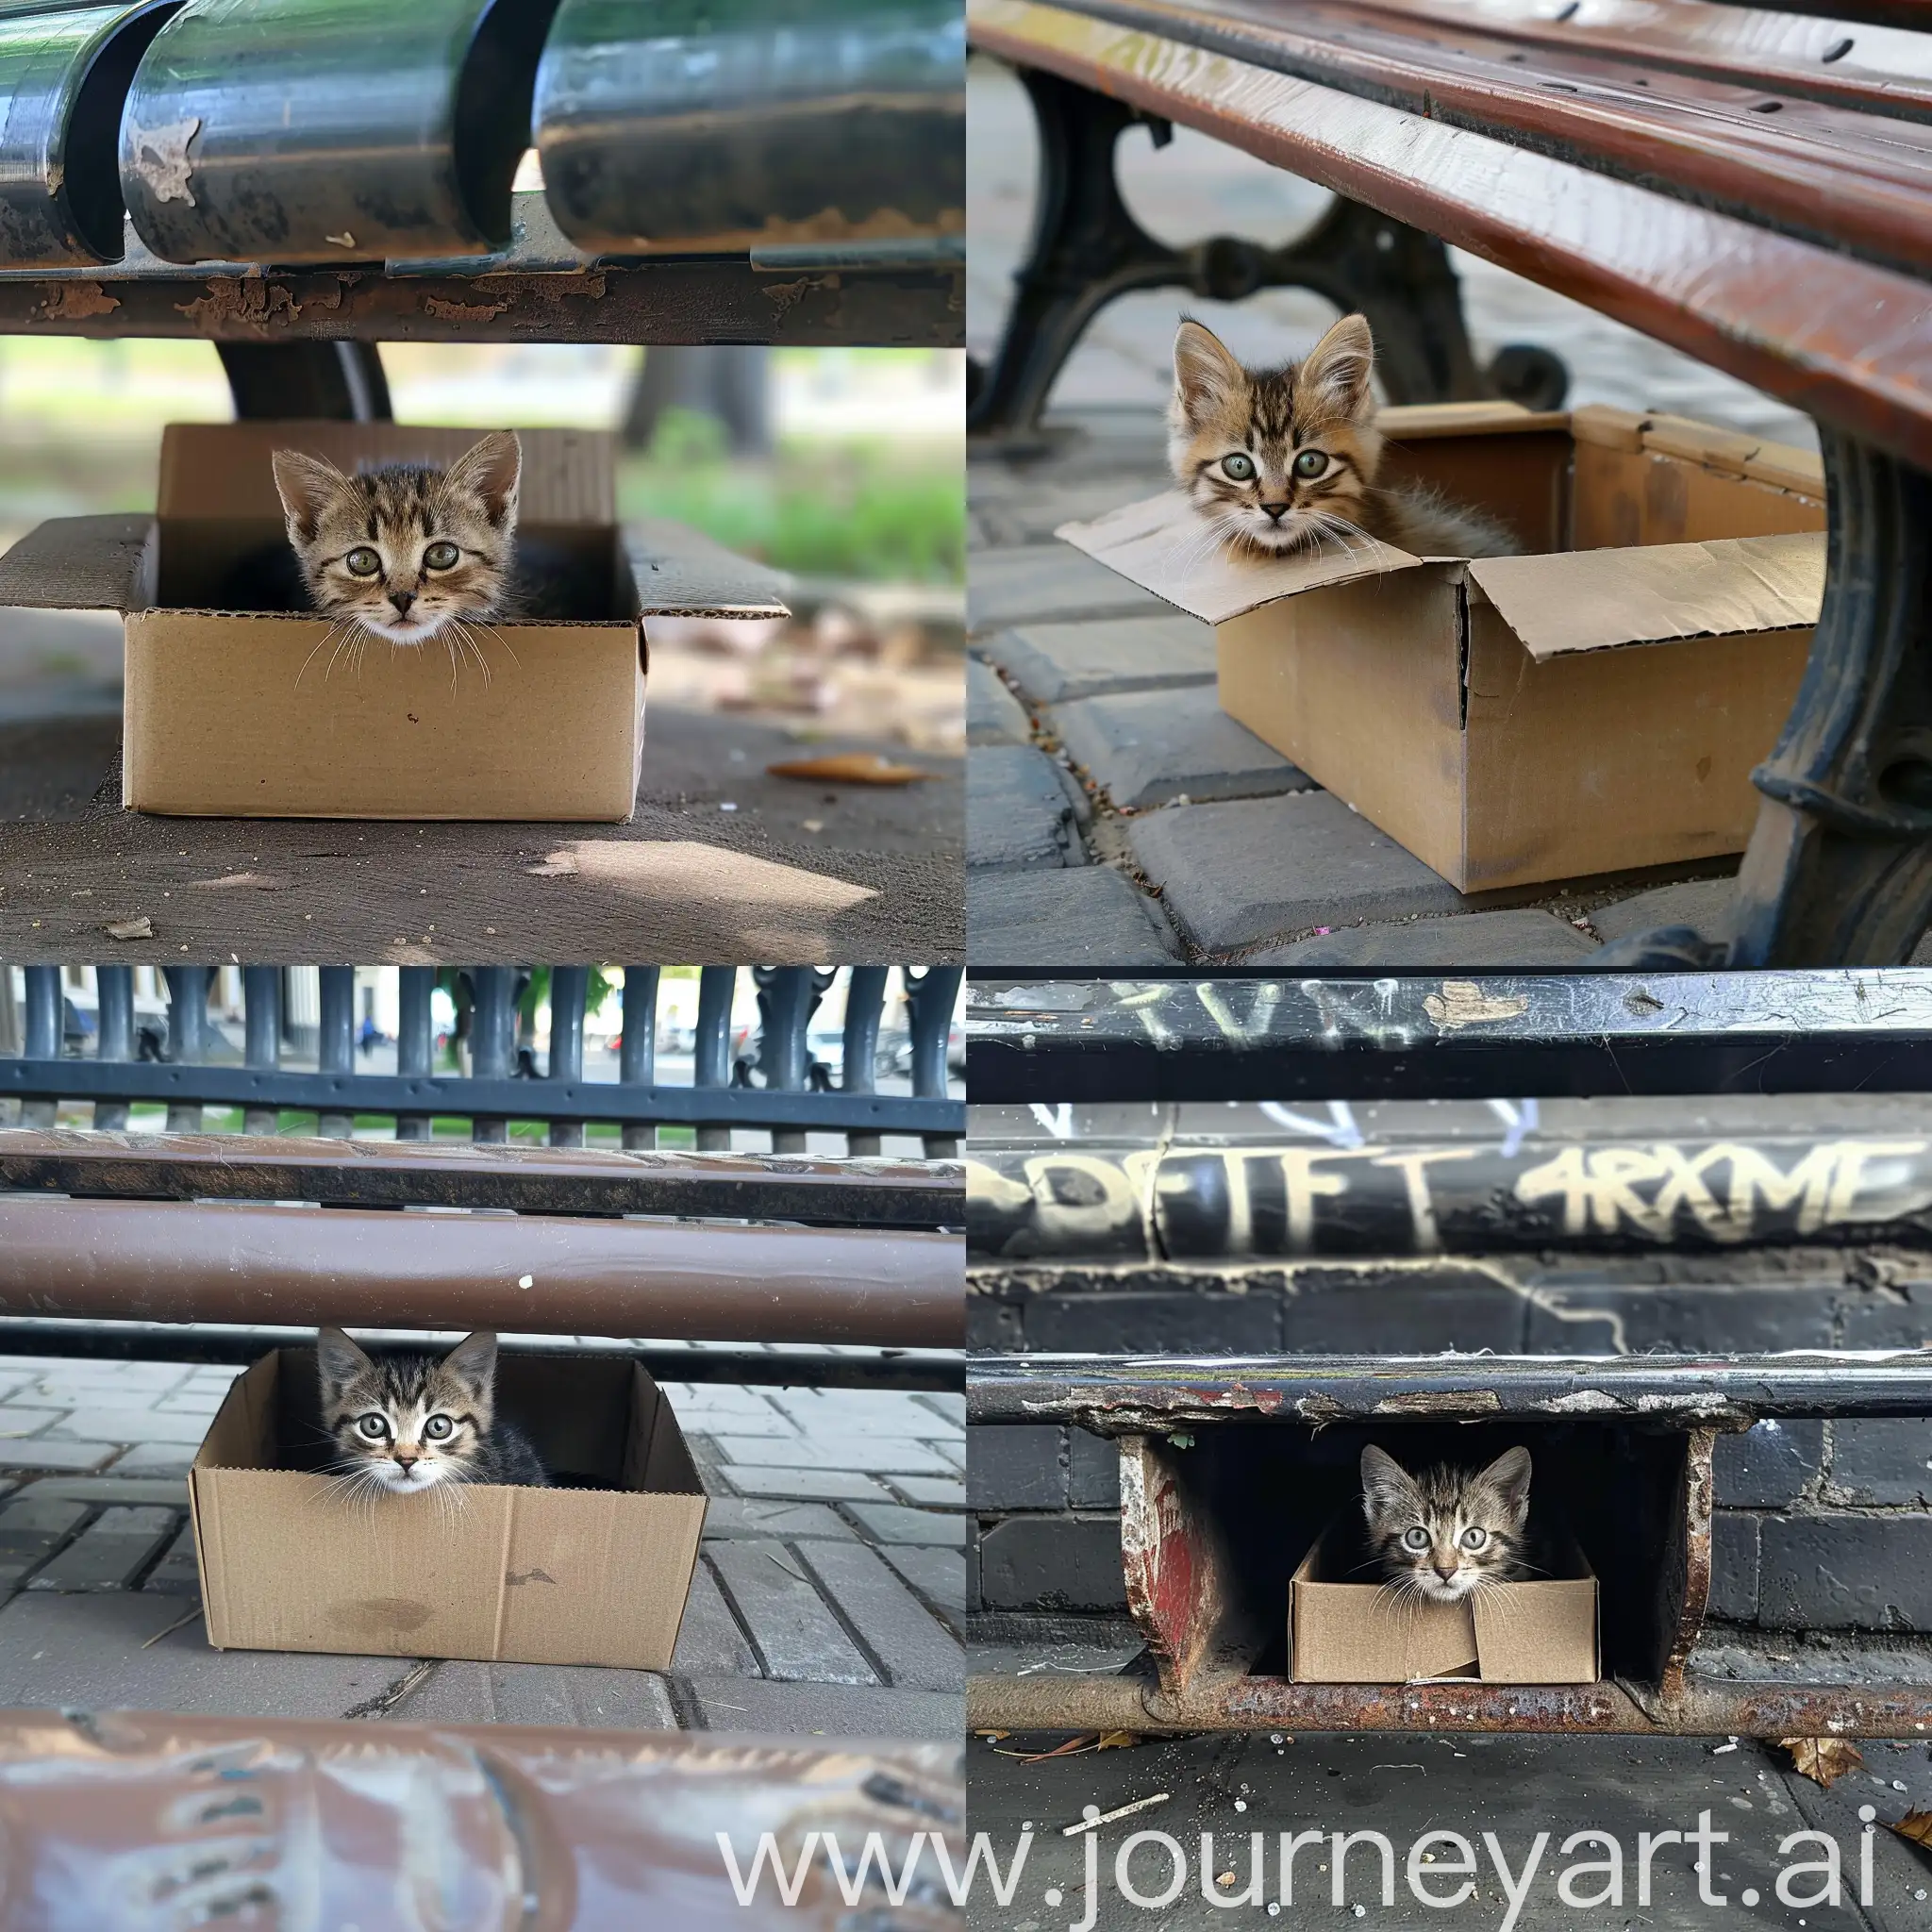 Adorable-Kitten-in-Box-Under-Bench-High-Resolution-Image